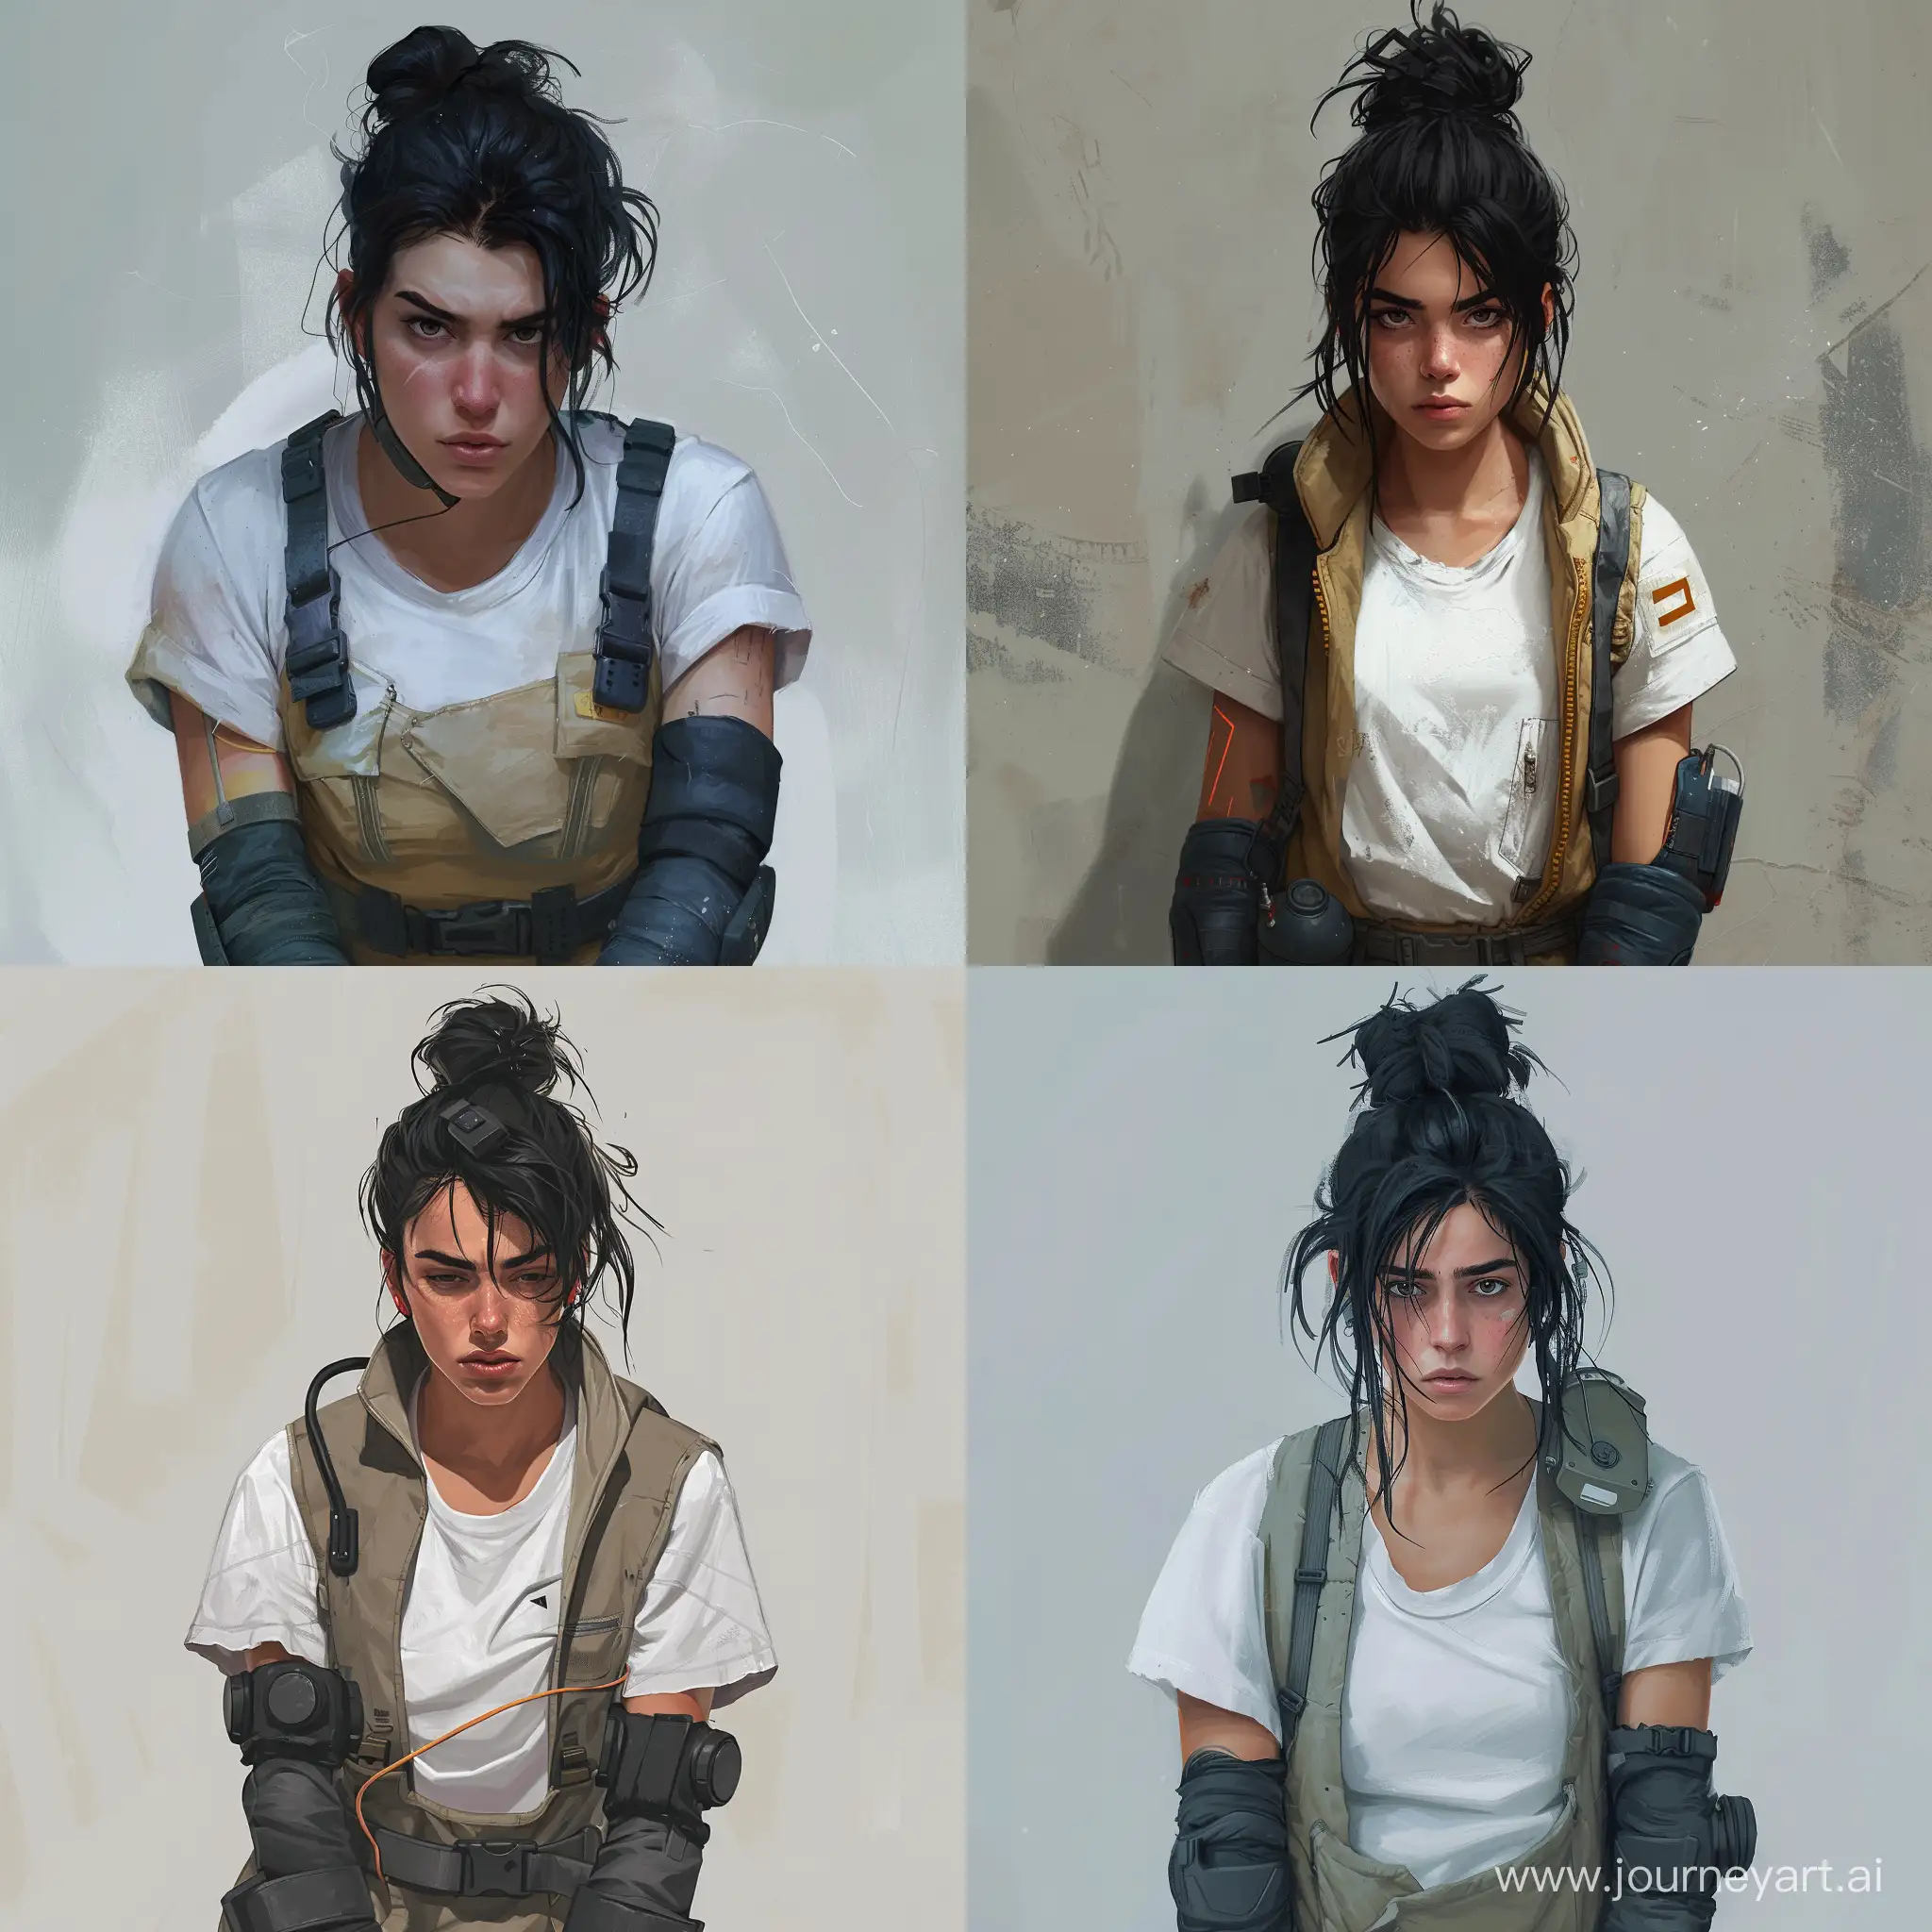 A tired sci fi nice looking attractive girl with black hair gathered in a bun at the back of her head, a couple of strands released near her face. She is wearing a white T-shirt and an engineering jumpsuit, the upper part of which is tied around her waist. She's wearing thick engineering gloves. The girl looks at the camera with a tired look. Concept art for the game. Character.